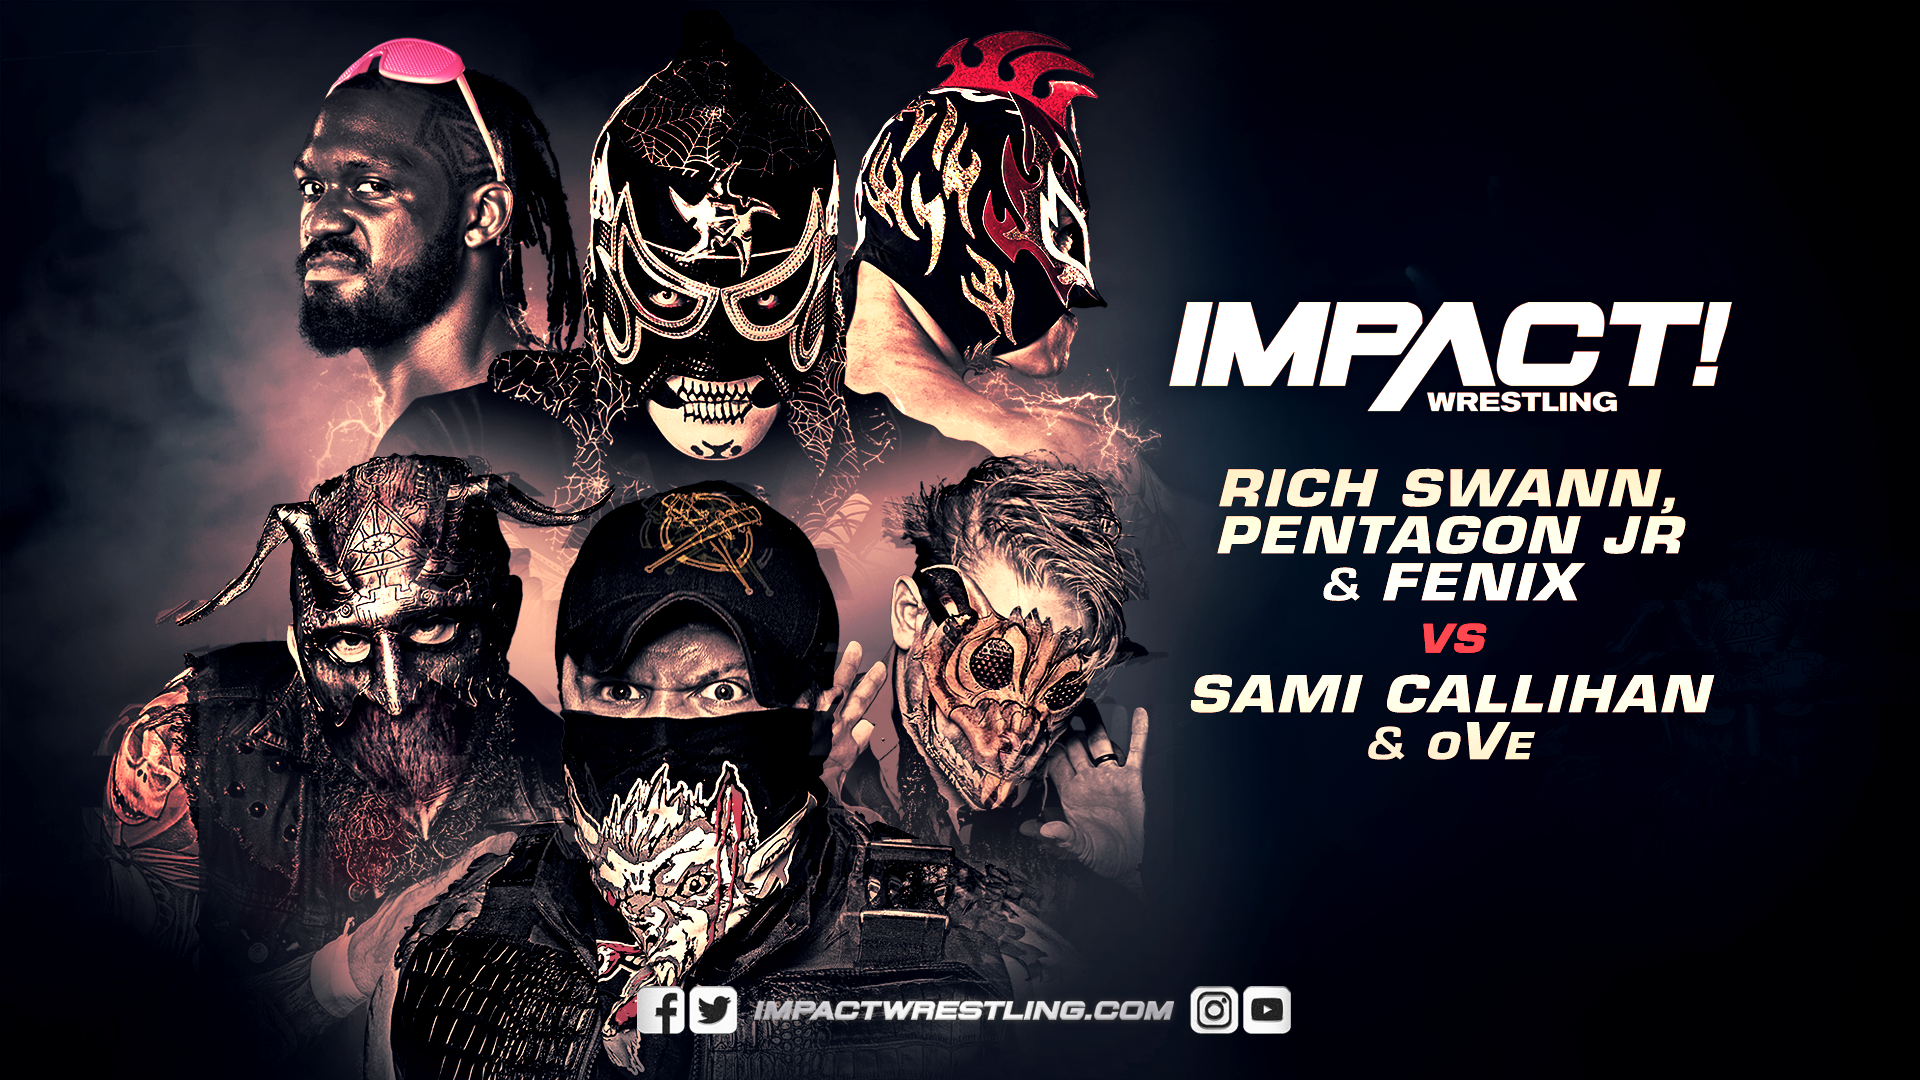 Impact Preview & Discussion: oVe In A Huge Six-Man Main Event, DeAngelo Williams Returns To Impact